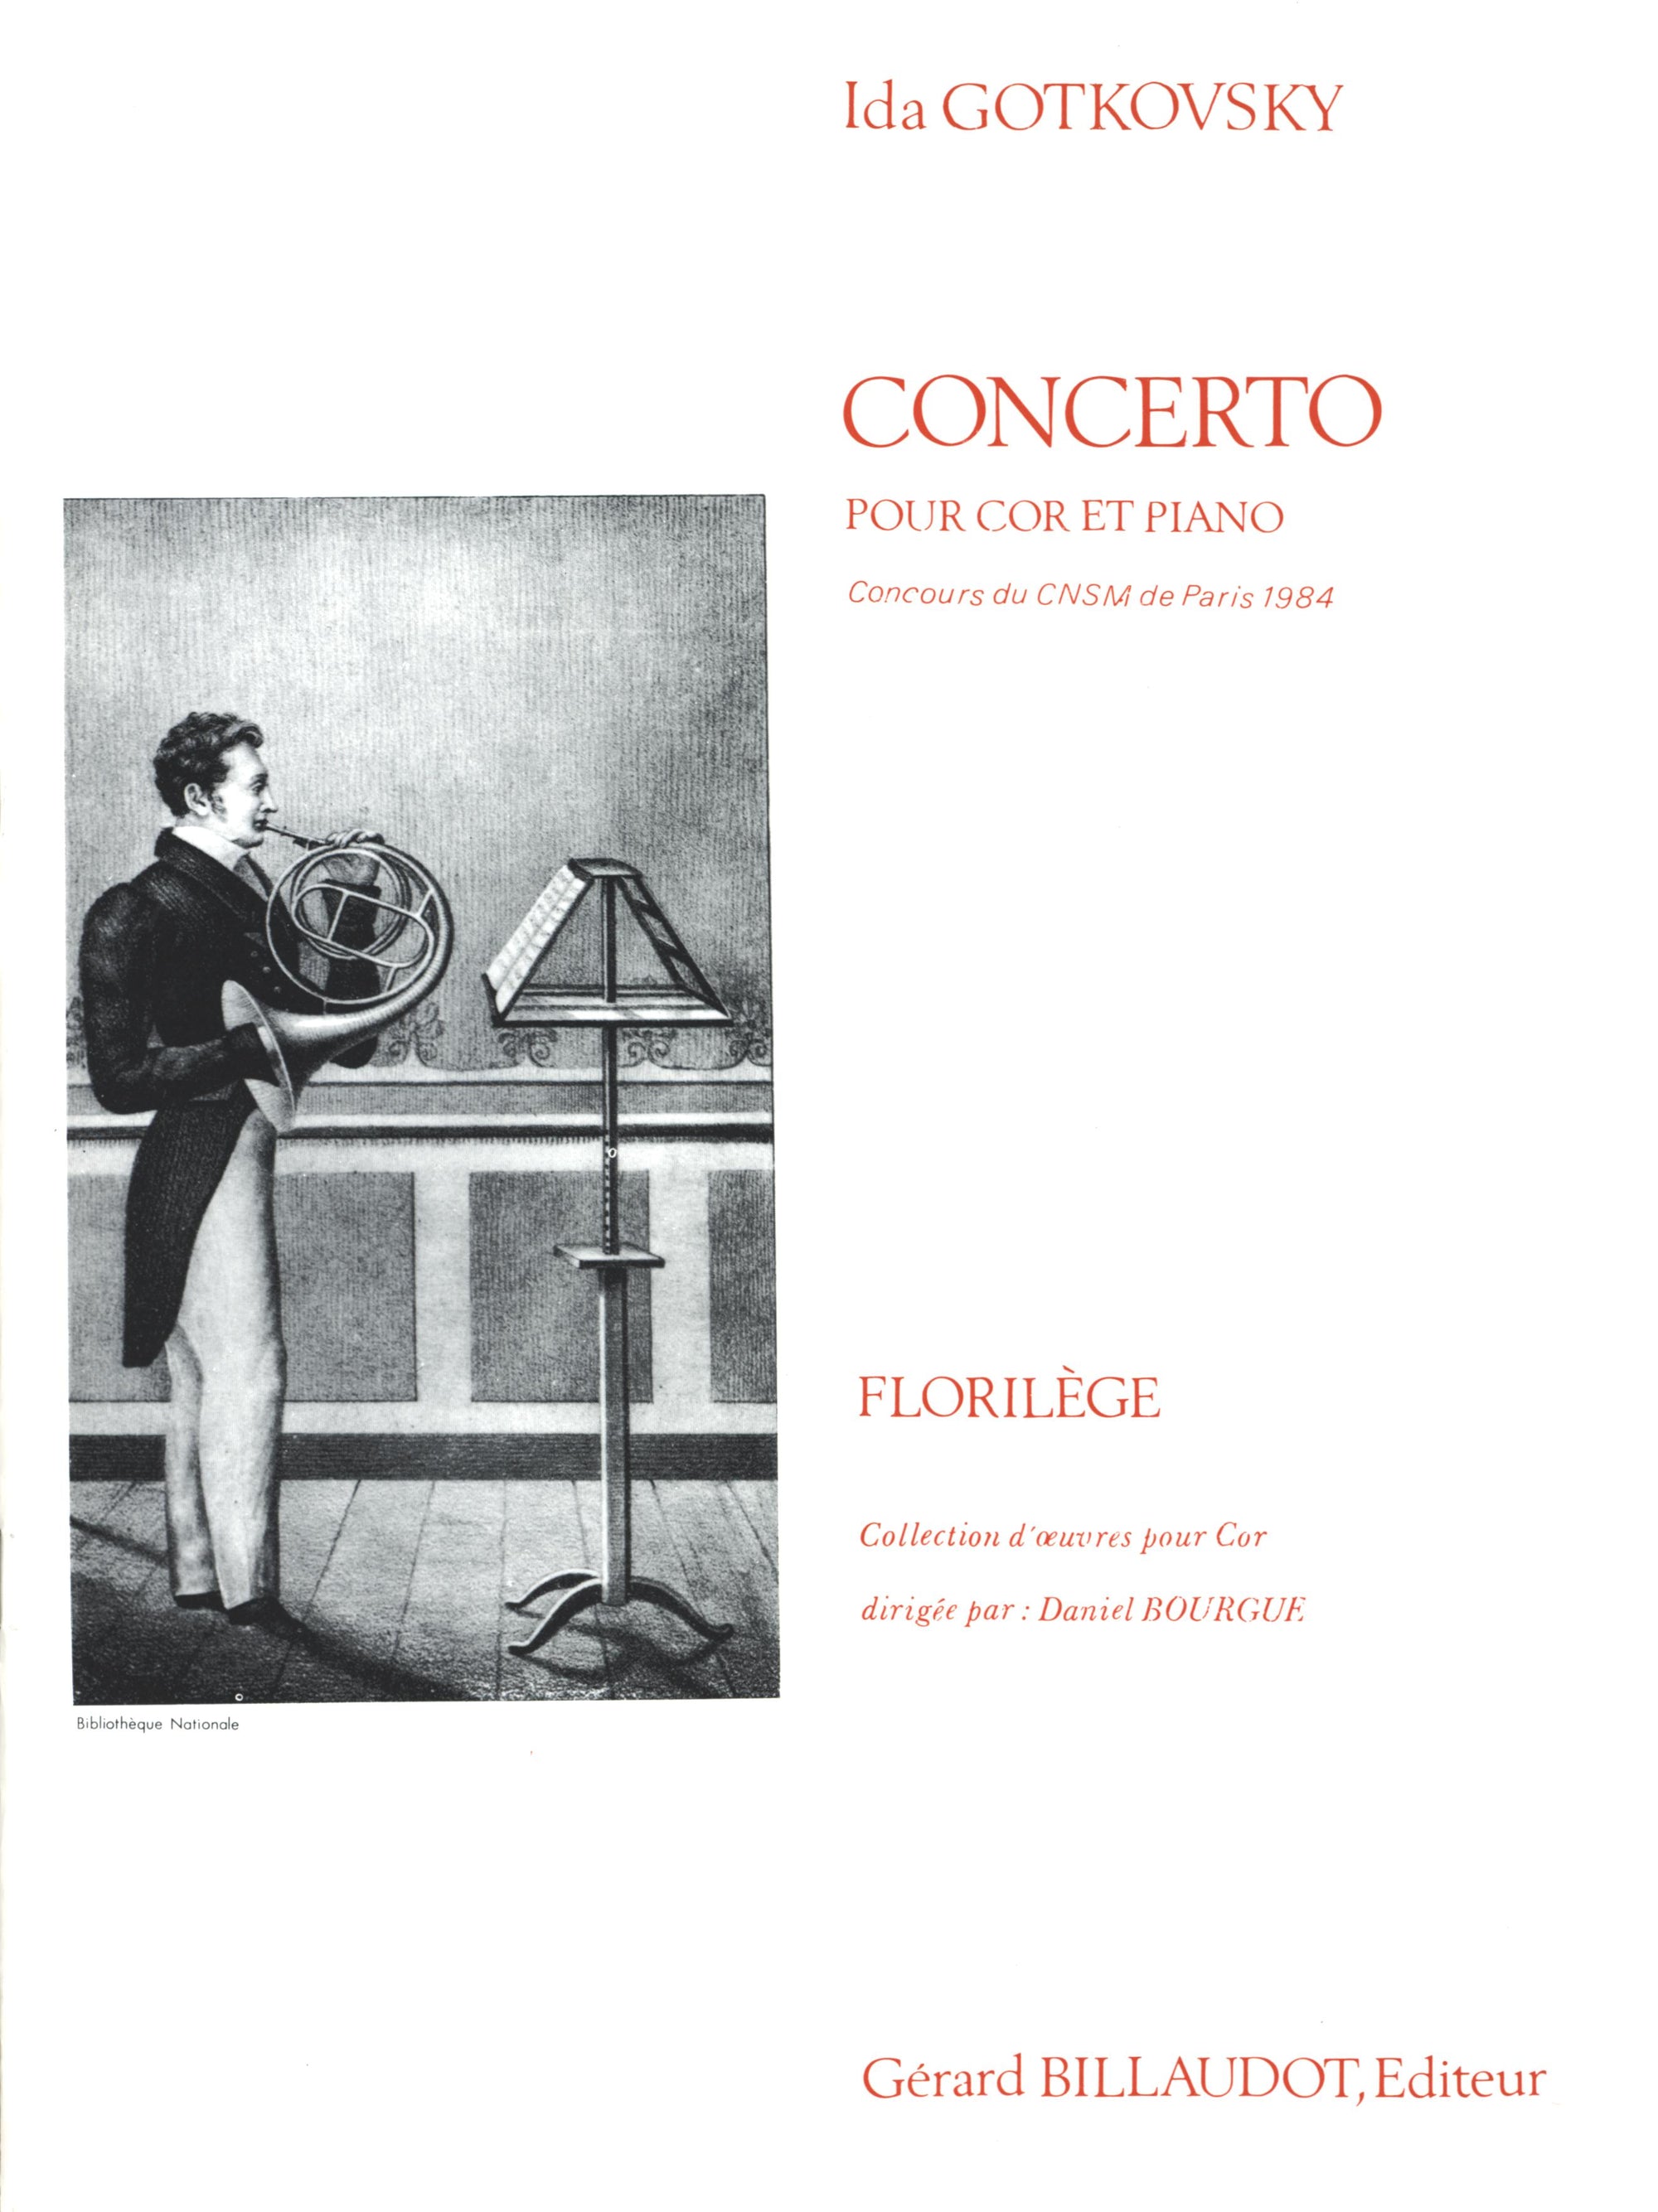 Gotkovsky: Concerto for Horn and Piano